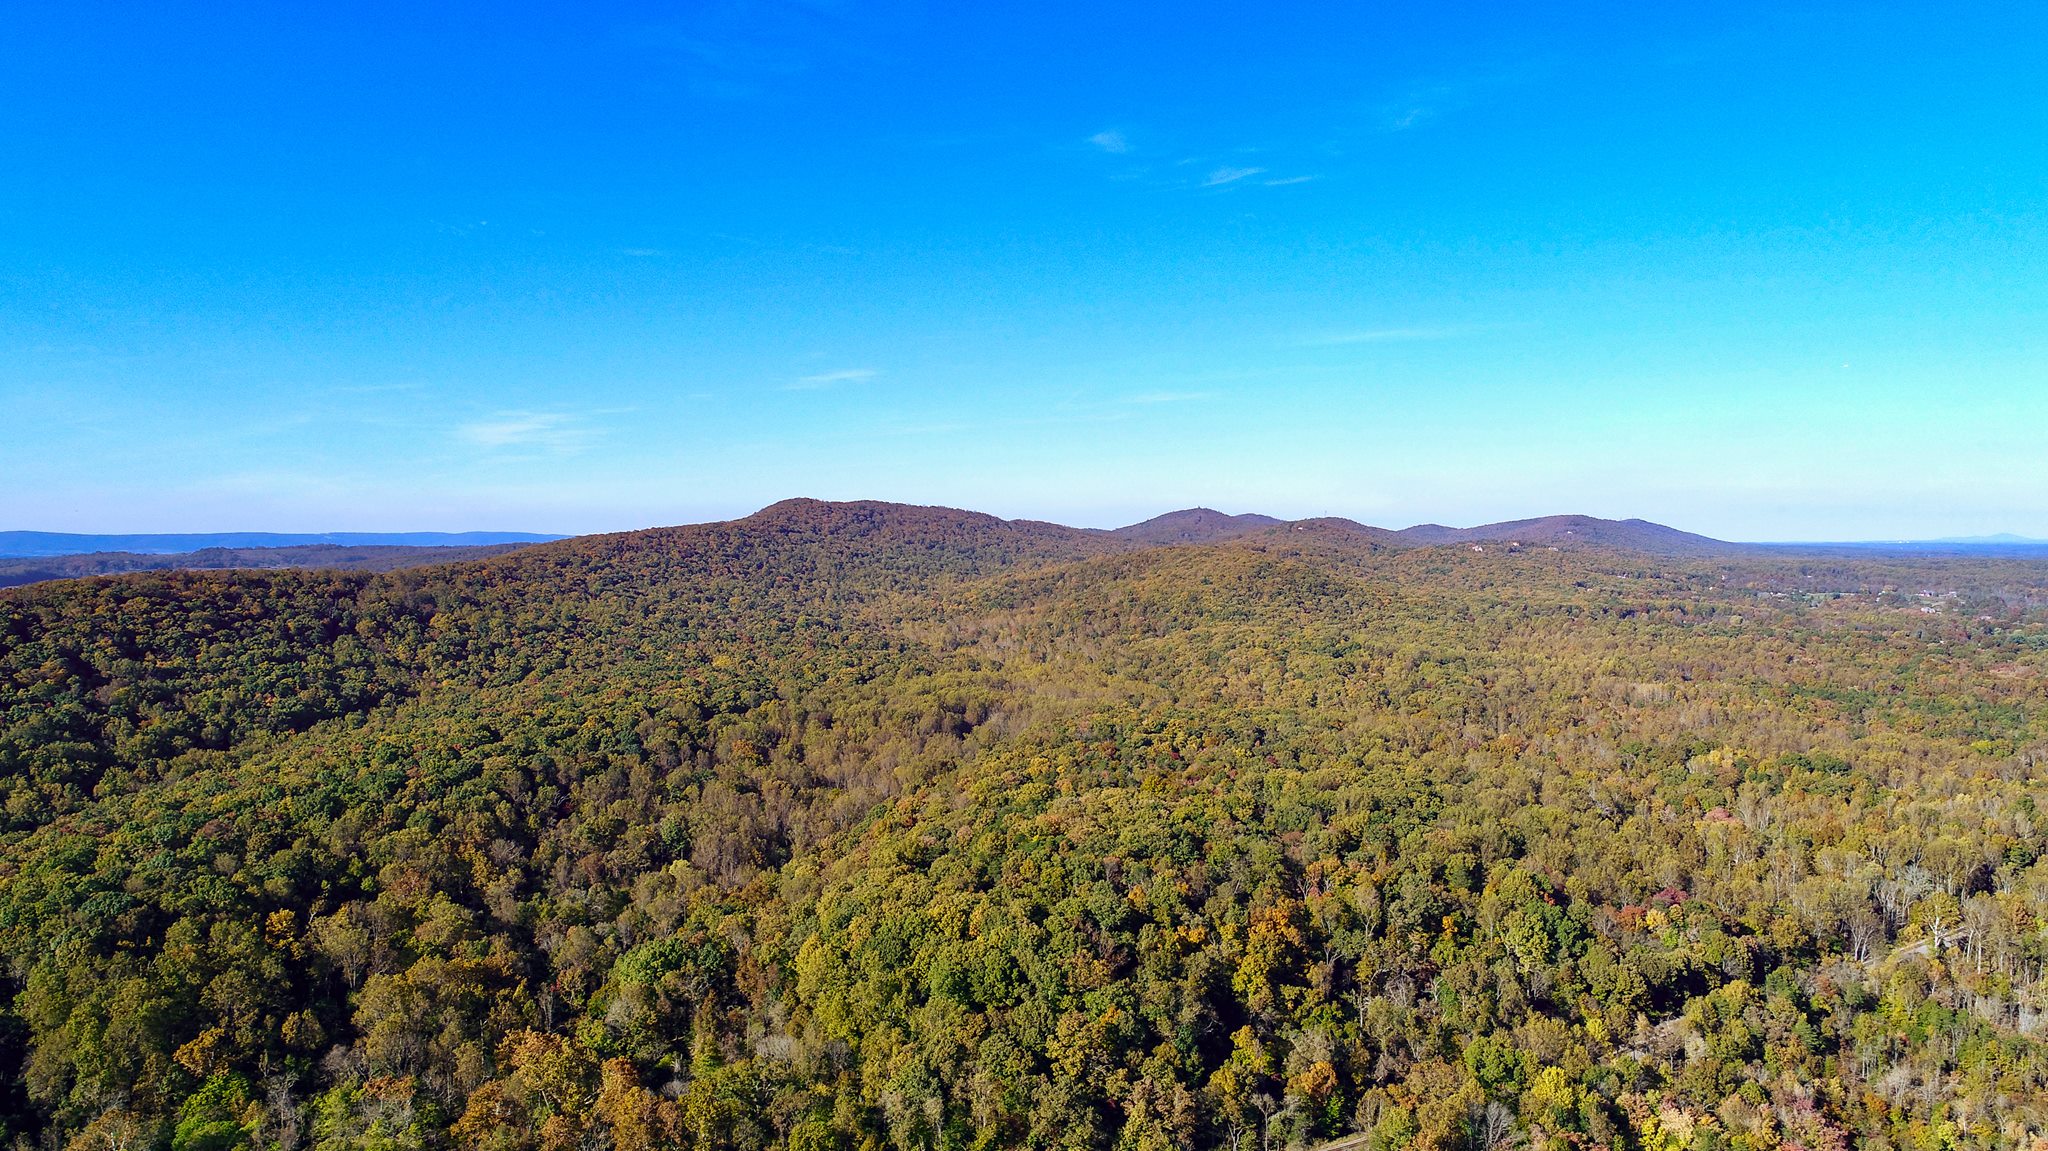 A wide-angle view of a mountains during autumn.